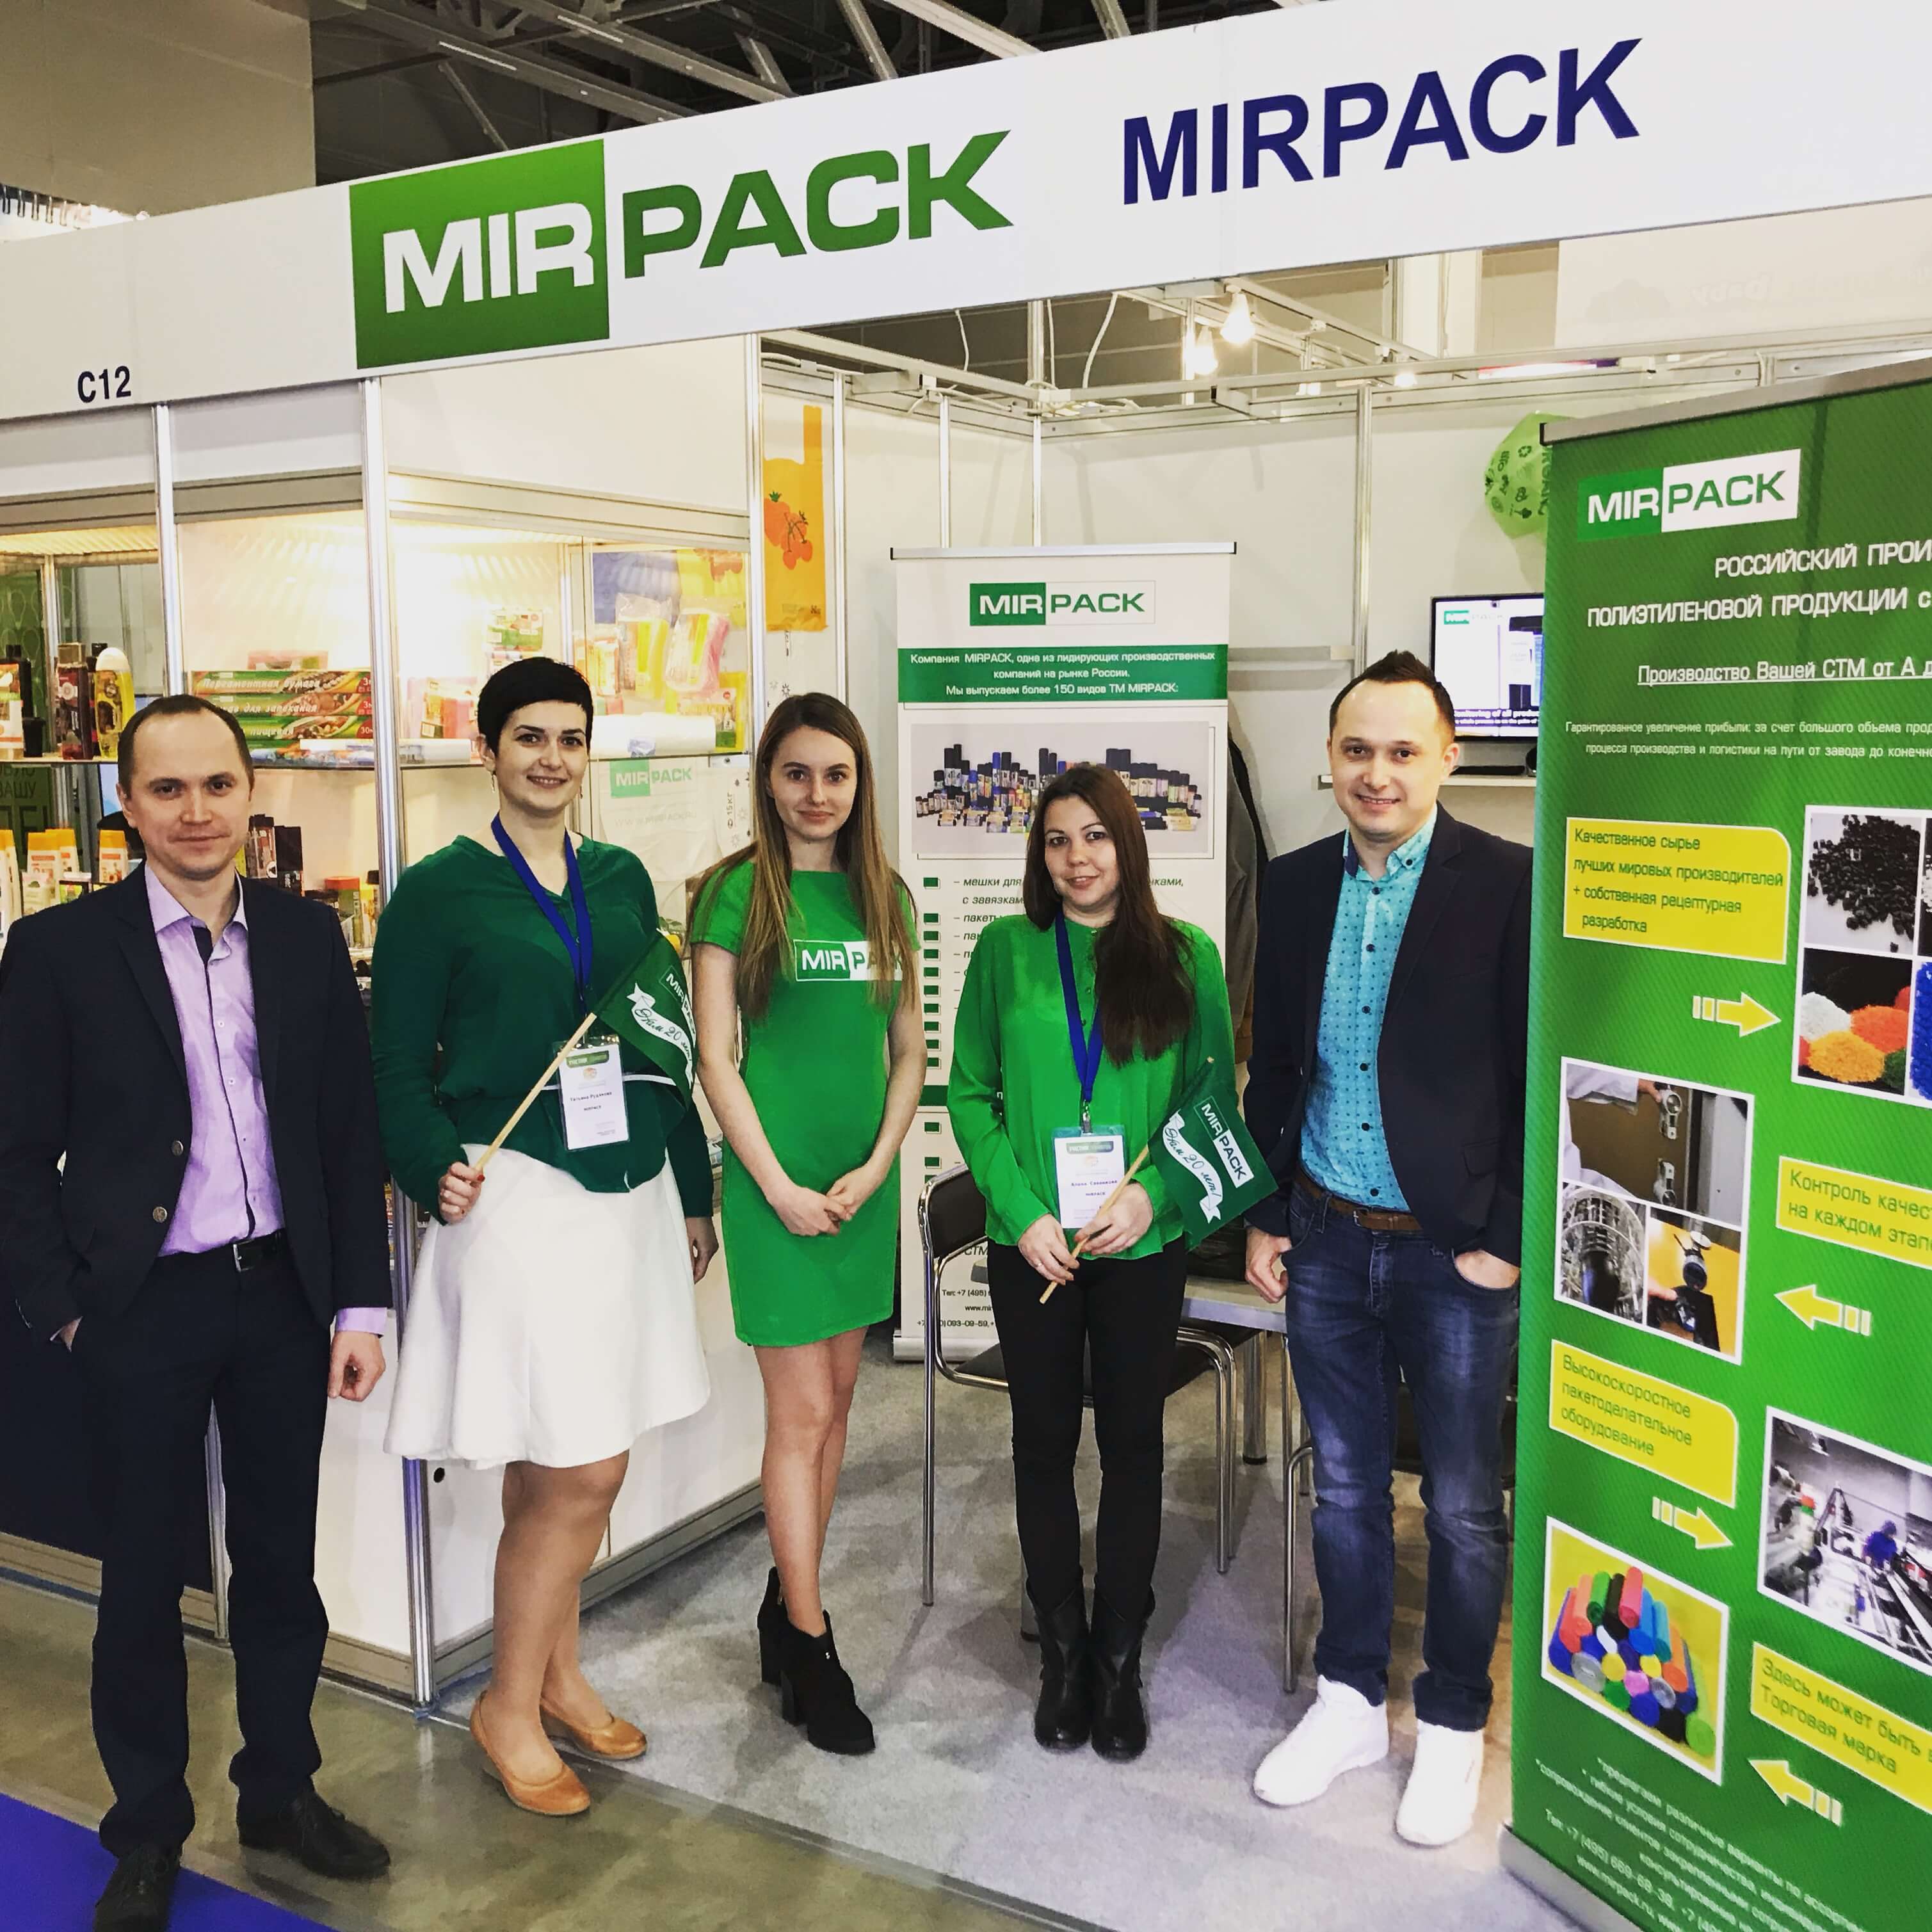 MIRPACK at STM - IPLS 2018 Moscow Crocus Expo